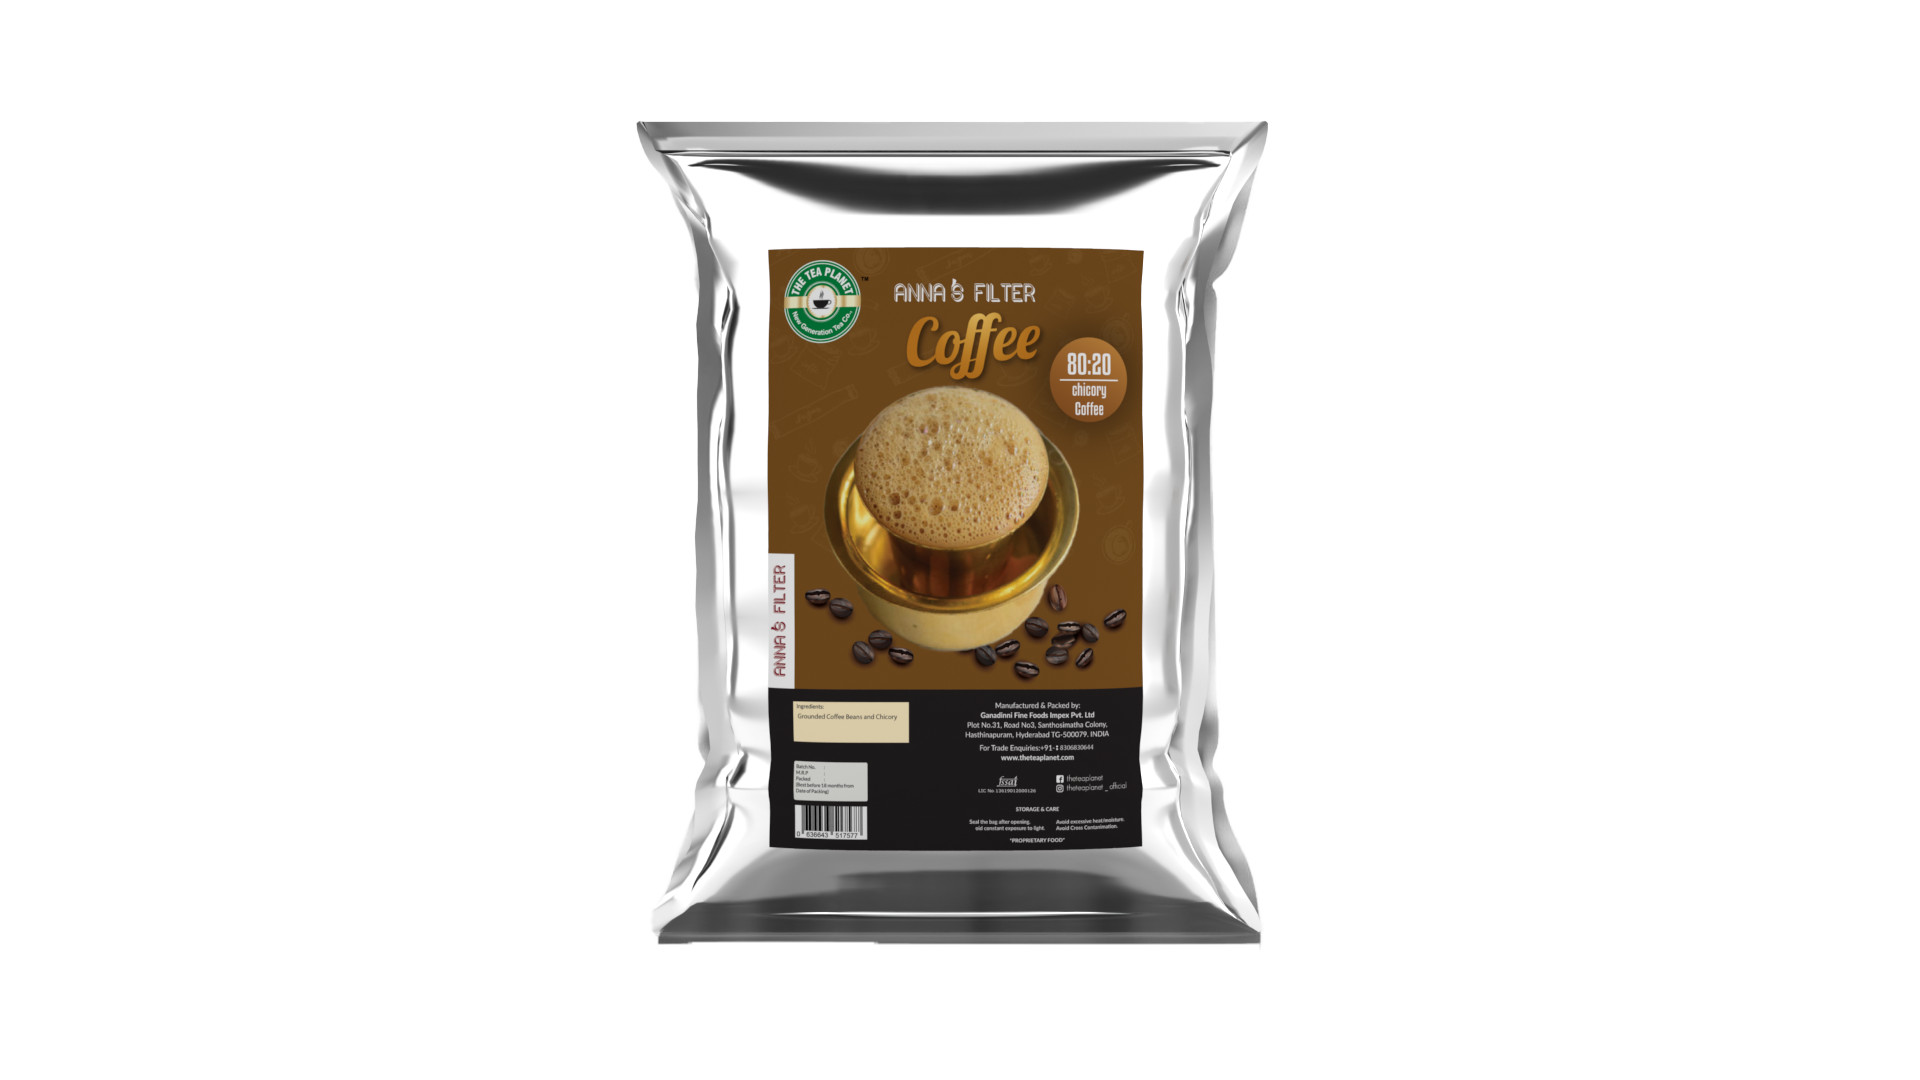 Anna's Filter Coffee 80:20 - 400 gms